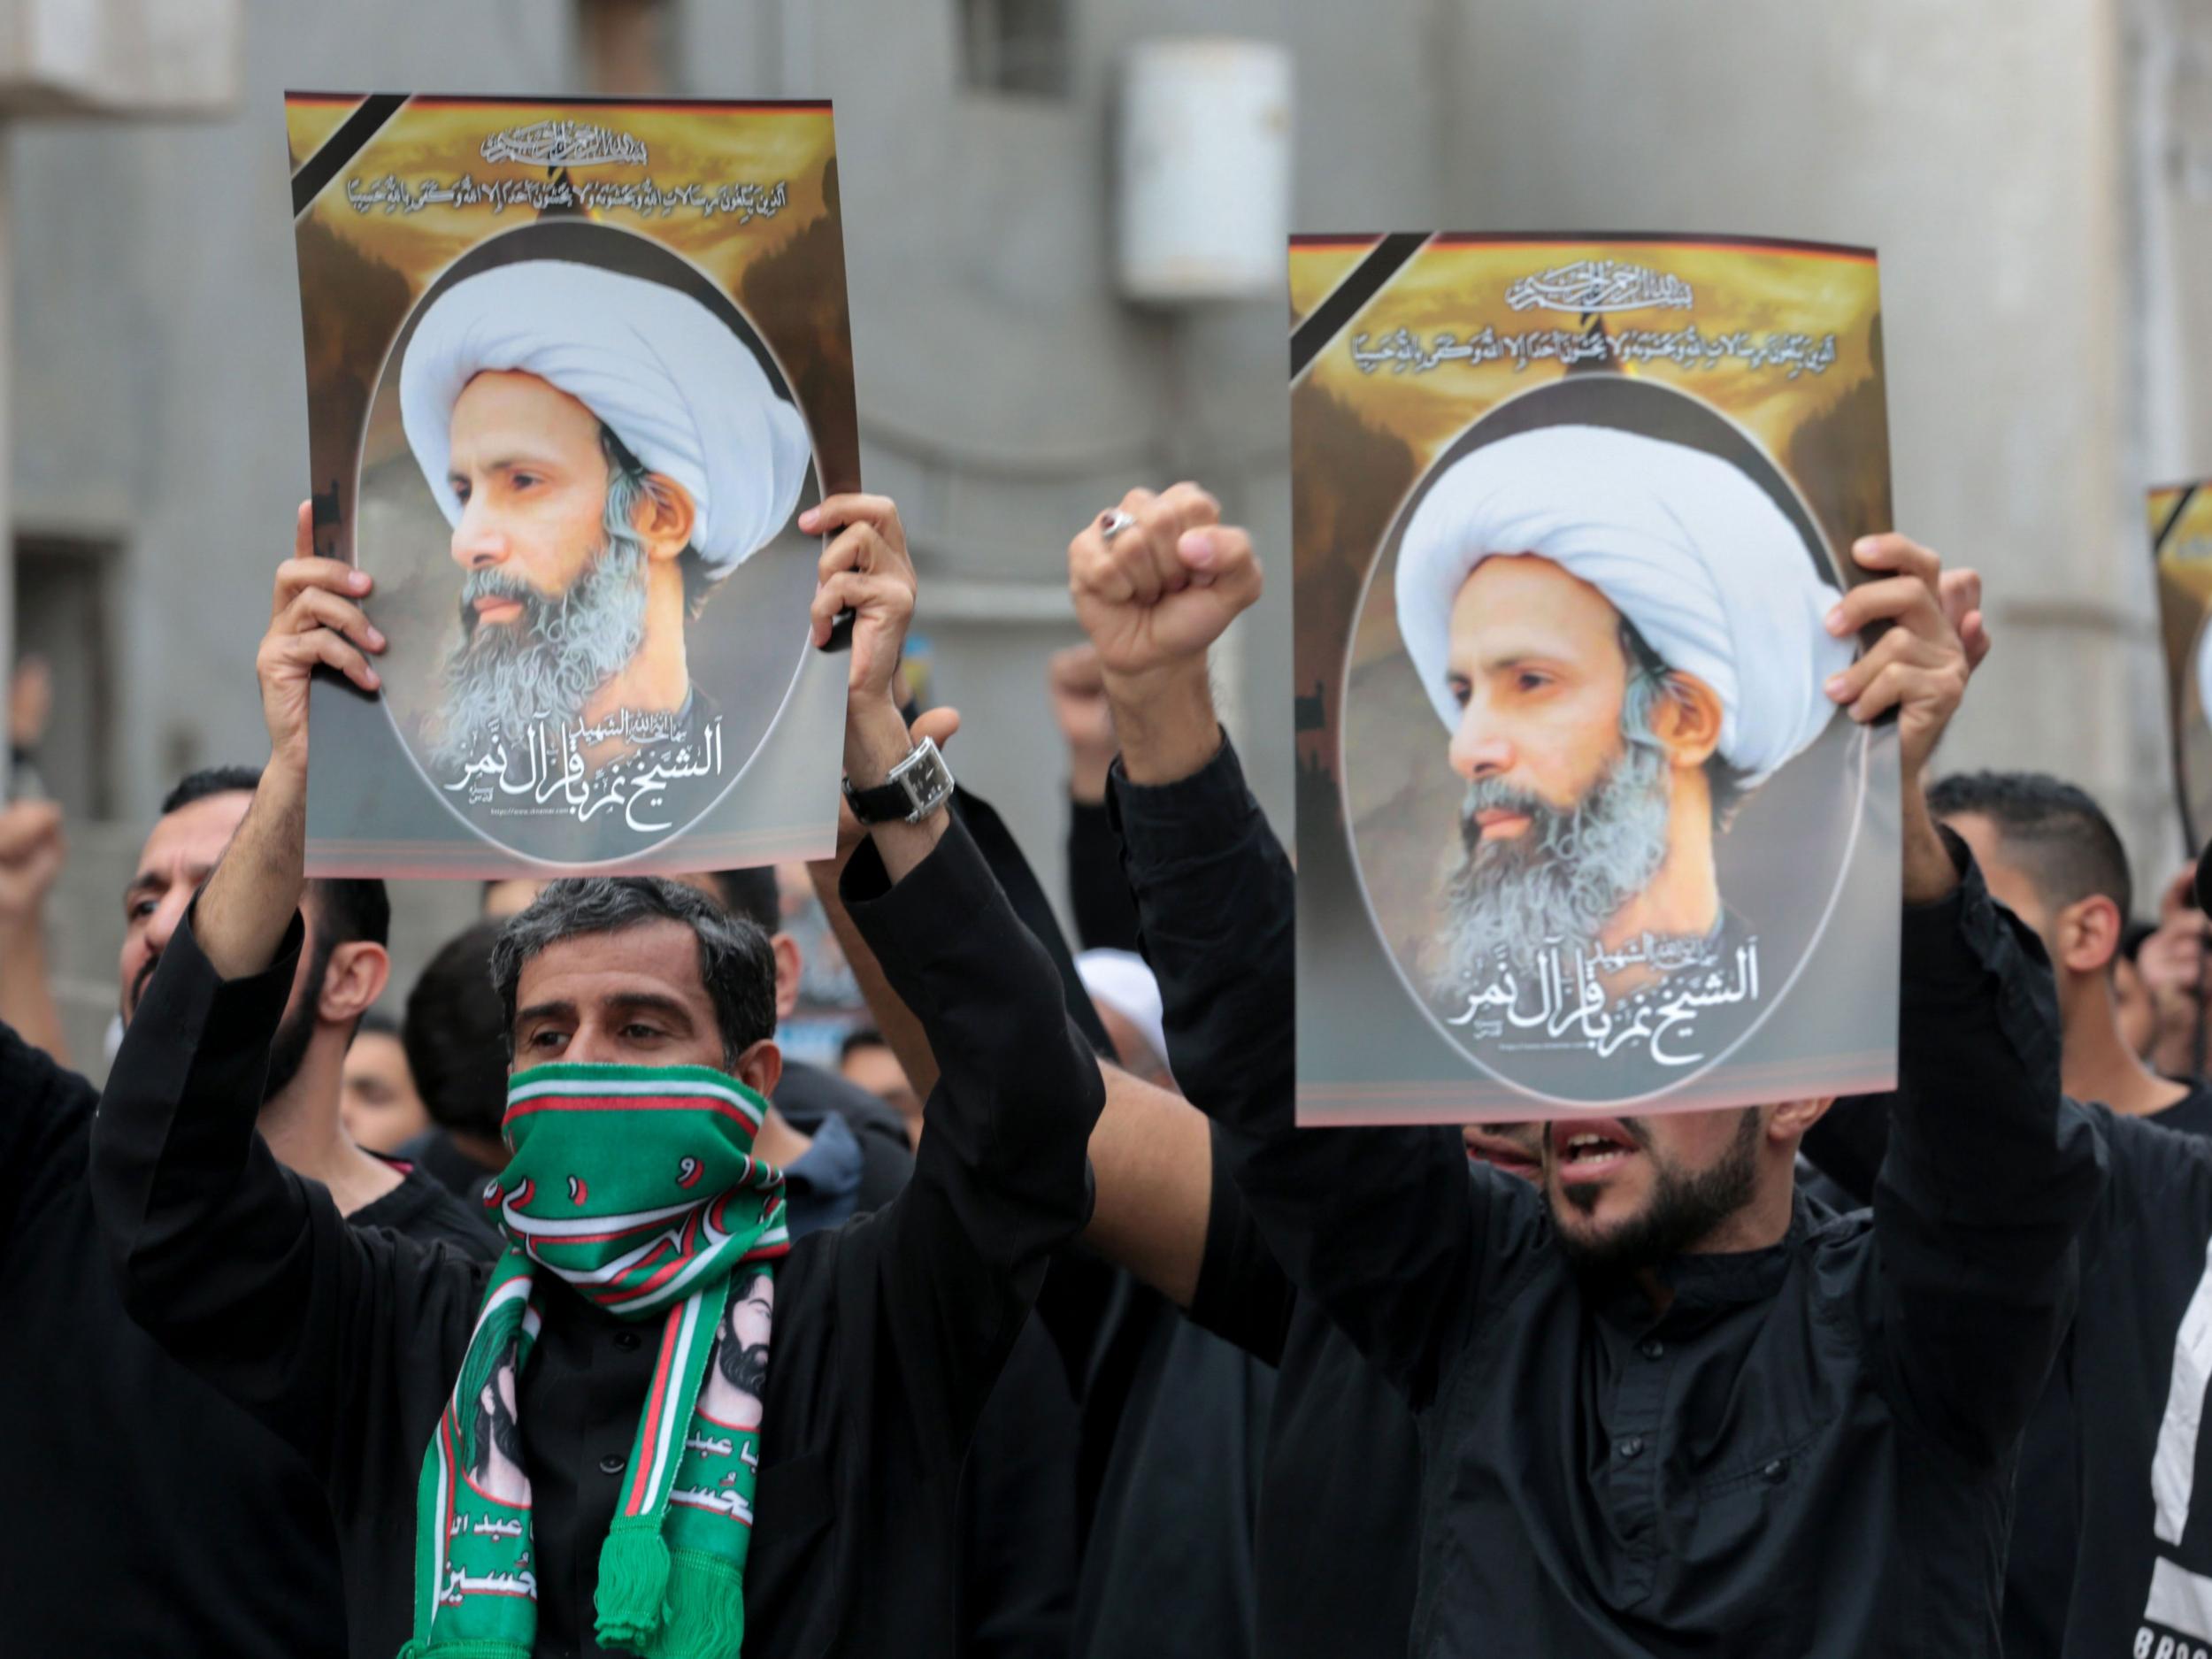 Saudi Shiite men hold placards bearing portraits of prominent Shiite Muslim cleric Nimr al-Nimr during a protest against his execution by Saudi authorities Getty